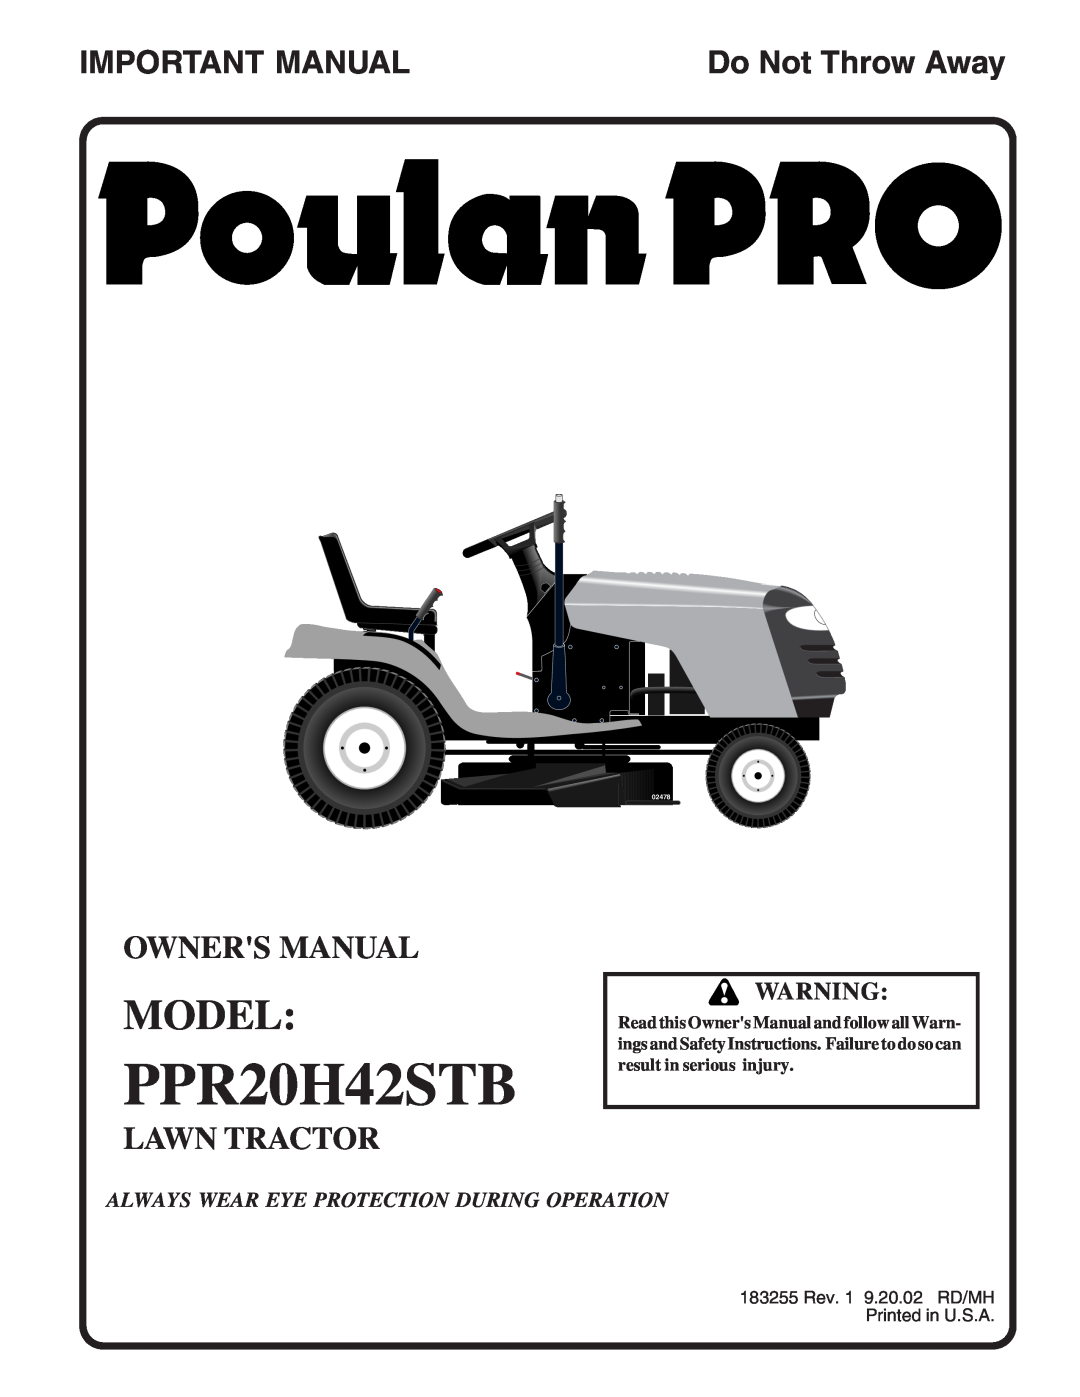 Poulan PPR20H42STB owner manual Model, Important Manual, Lawn Tractor, Do Not Throw Away, 02478 